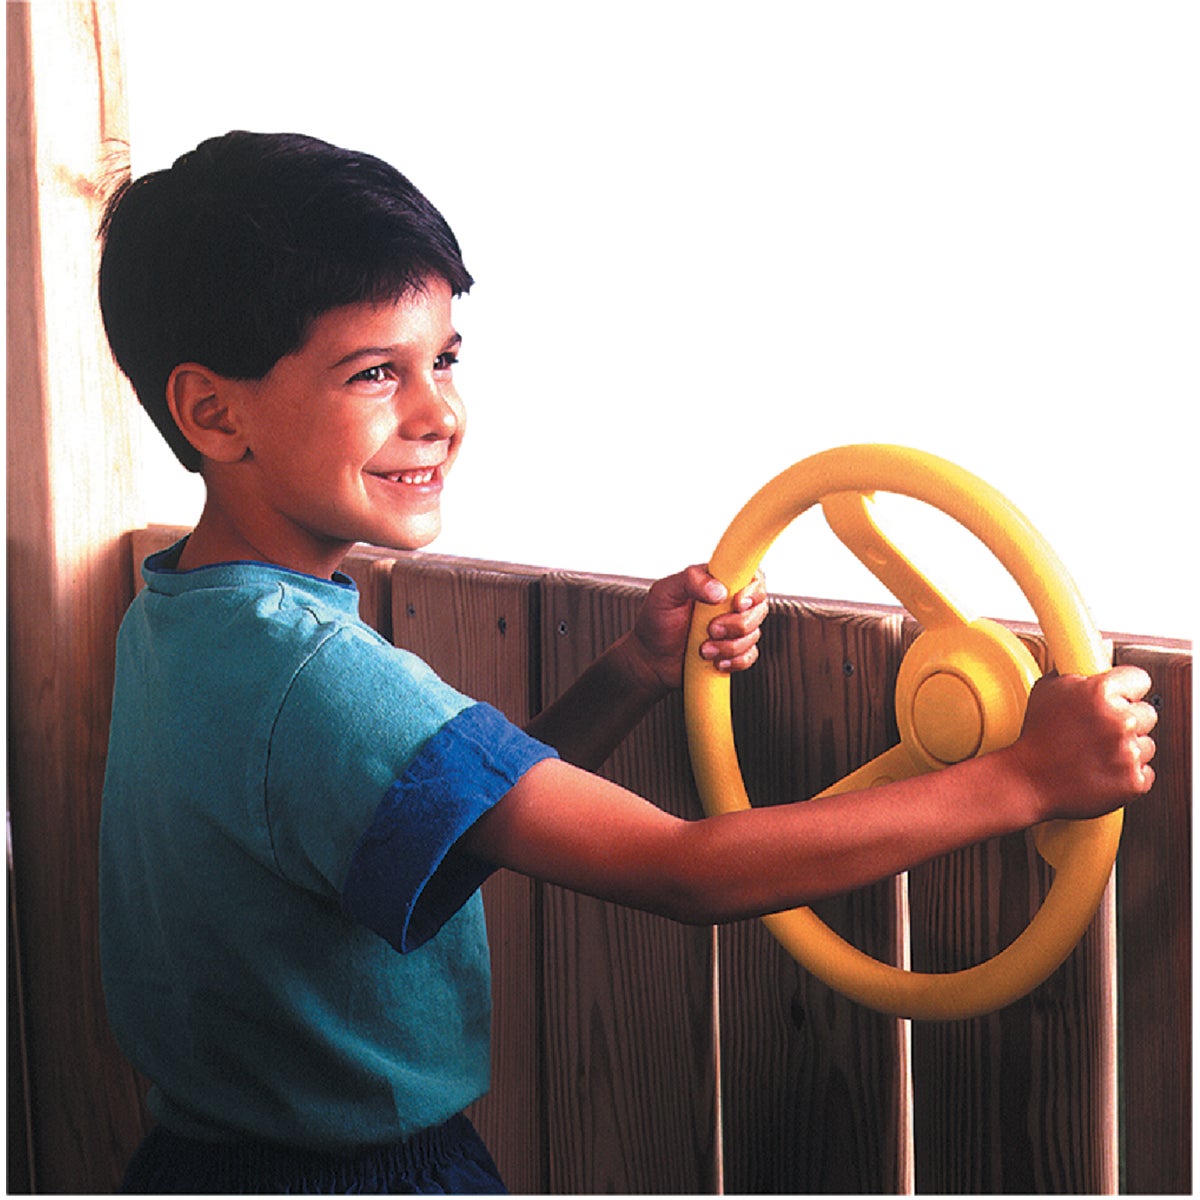 Item 829986, The steering wheel easily attaches to wood activity centers.